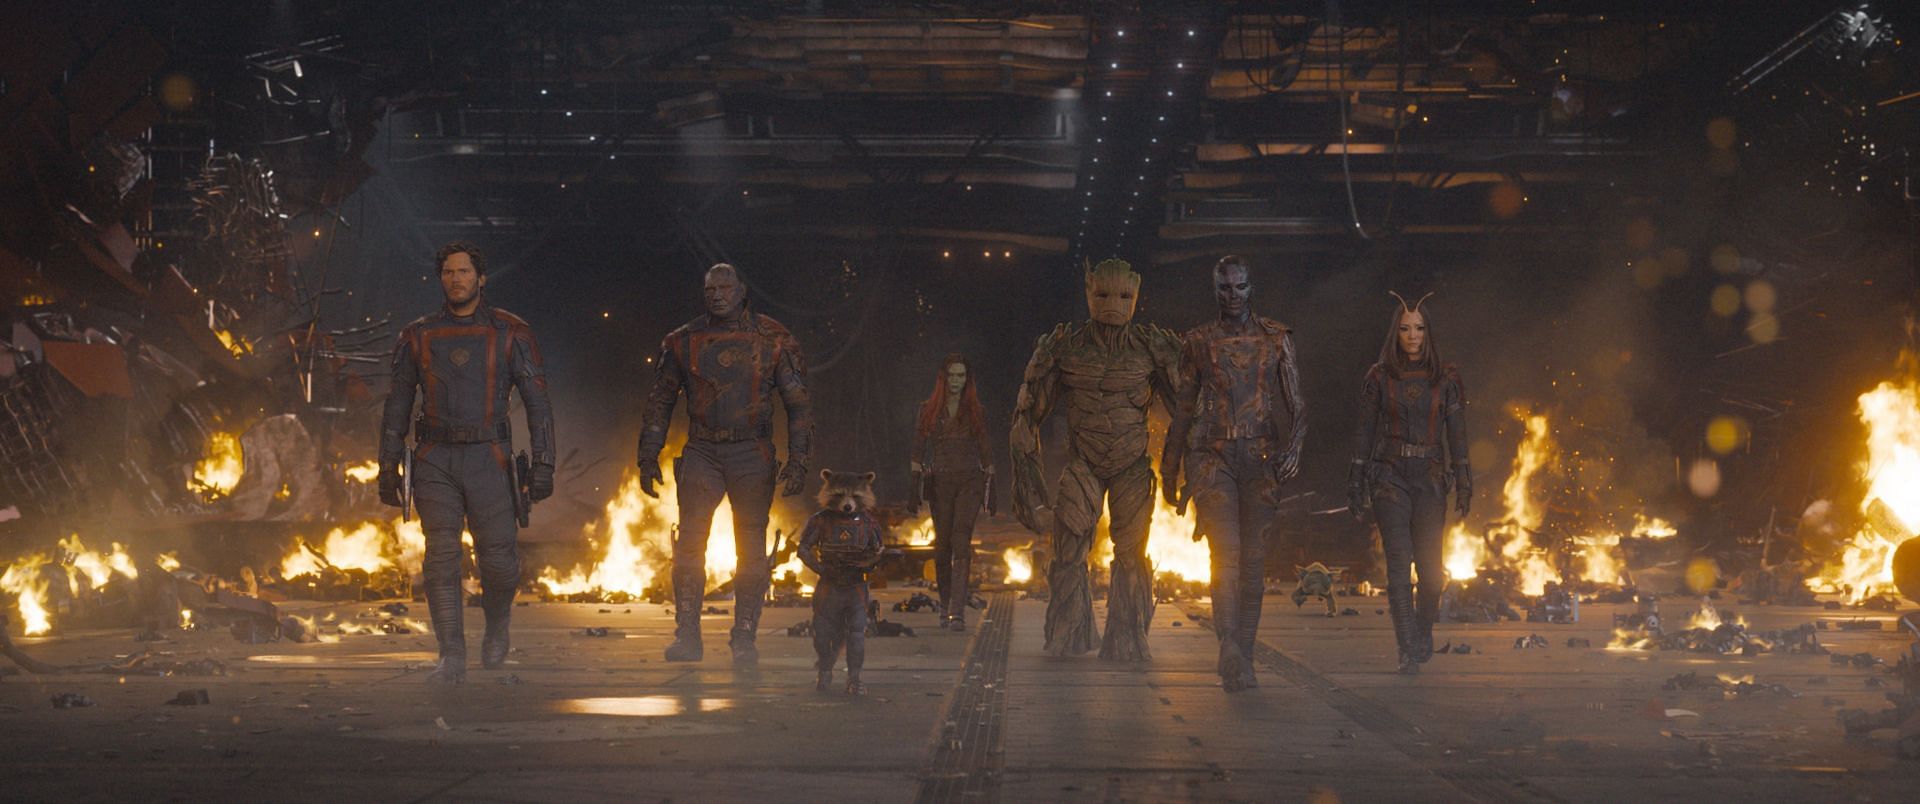 James Gunn has revealed that the third part will have two post-credits scenes, leaving fans wondering what surprises await at the end of the beloved franchise (Image via Marvel Studios)